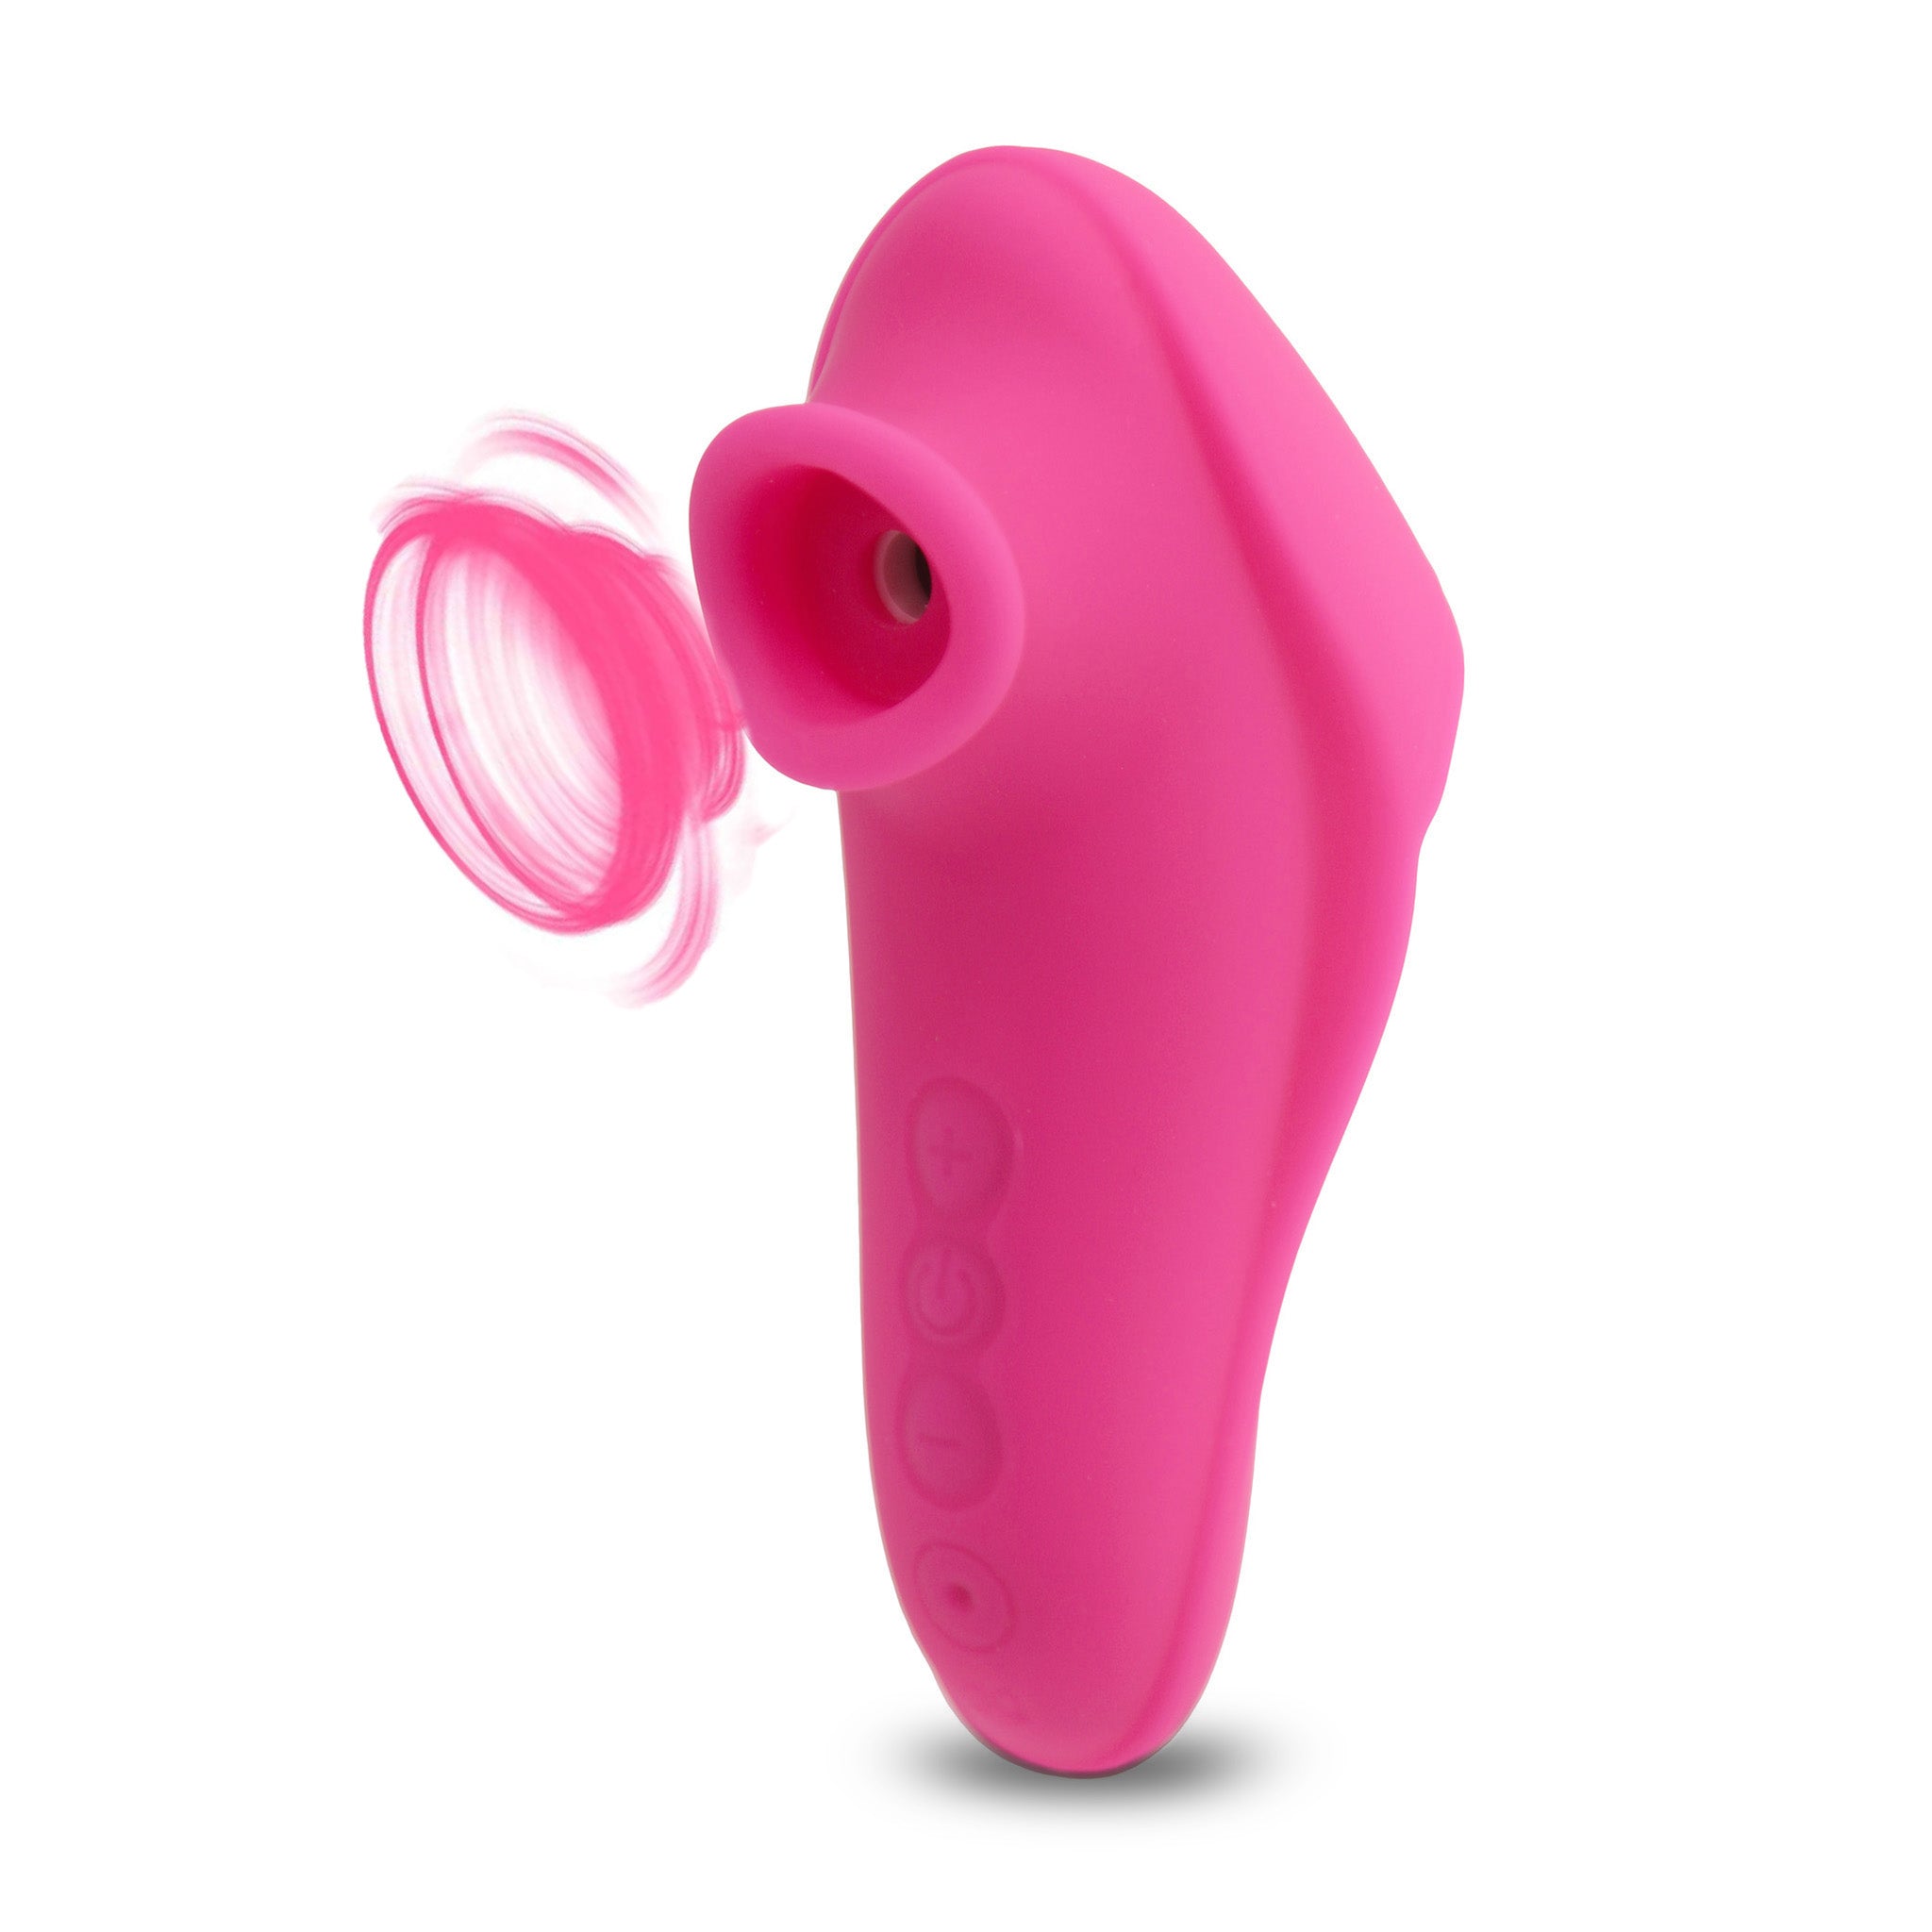 Rechargeable Nipple Clit Sucking Vibrator Stimulator Sex Toys for Women Couples